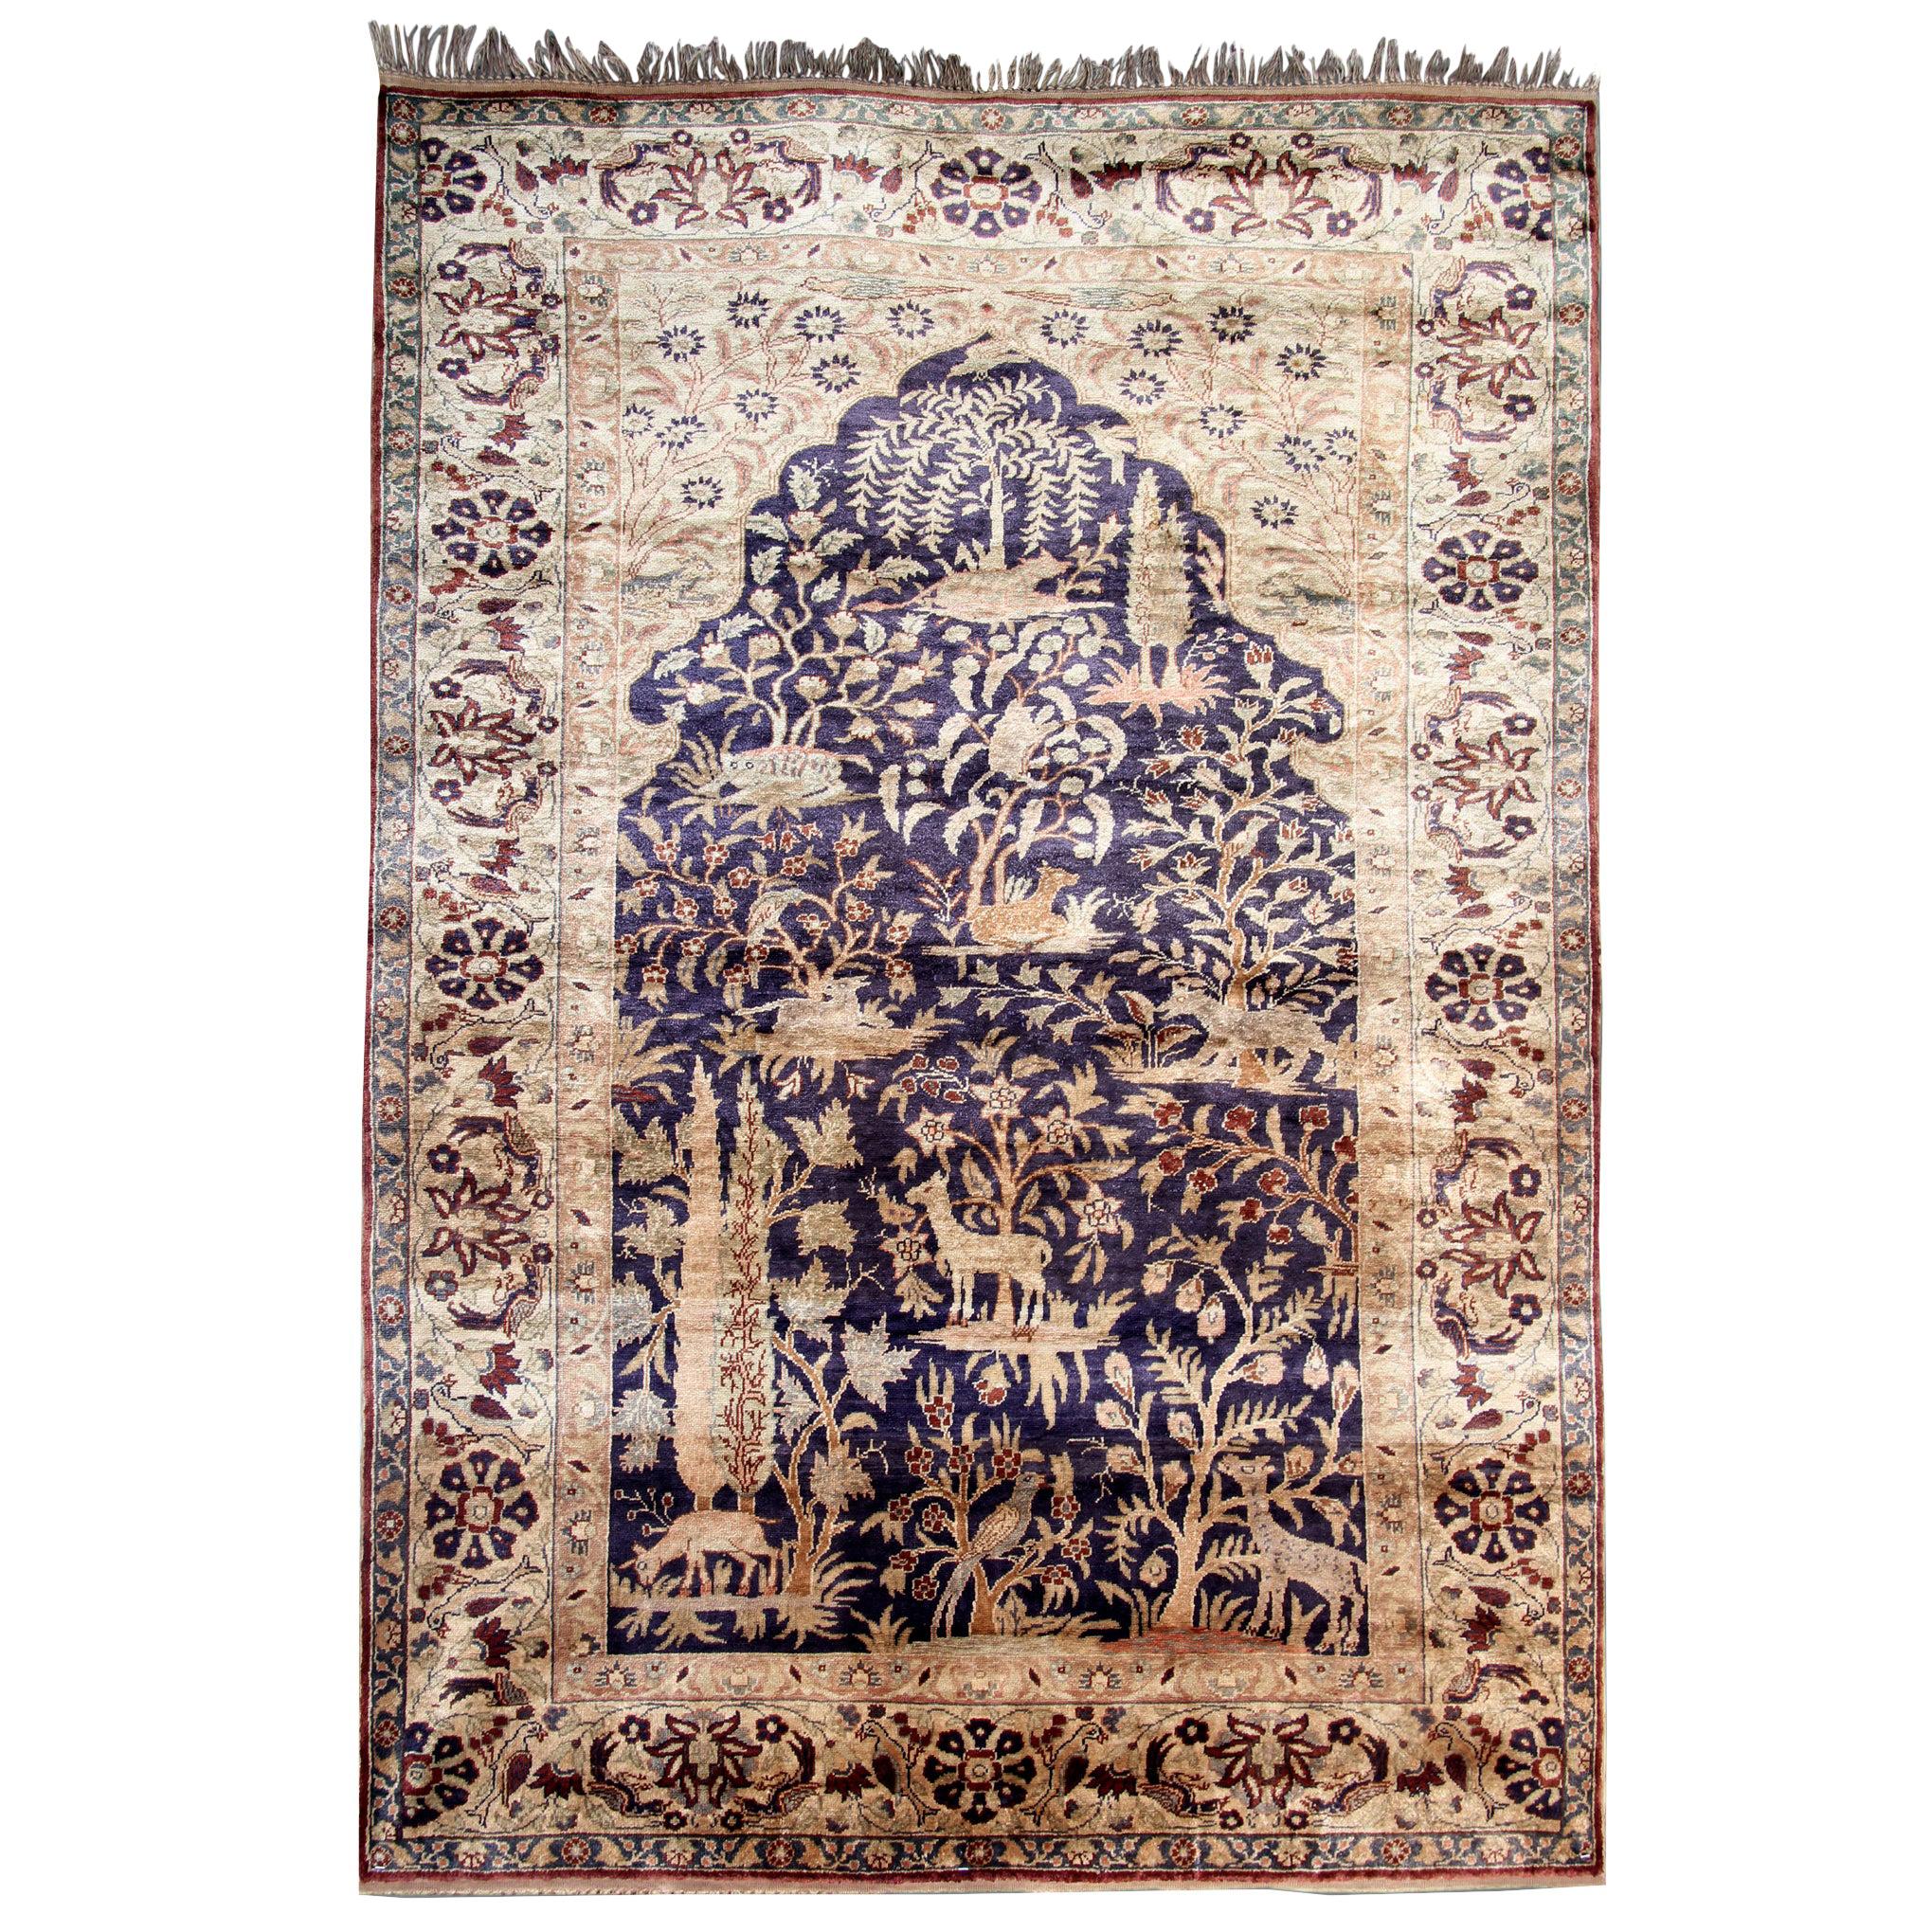 Antique Rugs, Pure Silk Rugs Turkish Rugs Handmade Carpet Oriental Rug for Sale For Sale